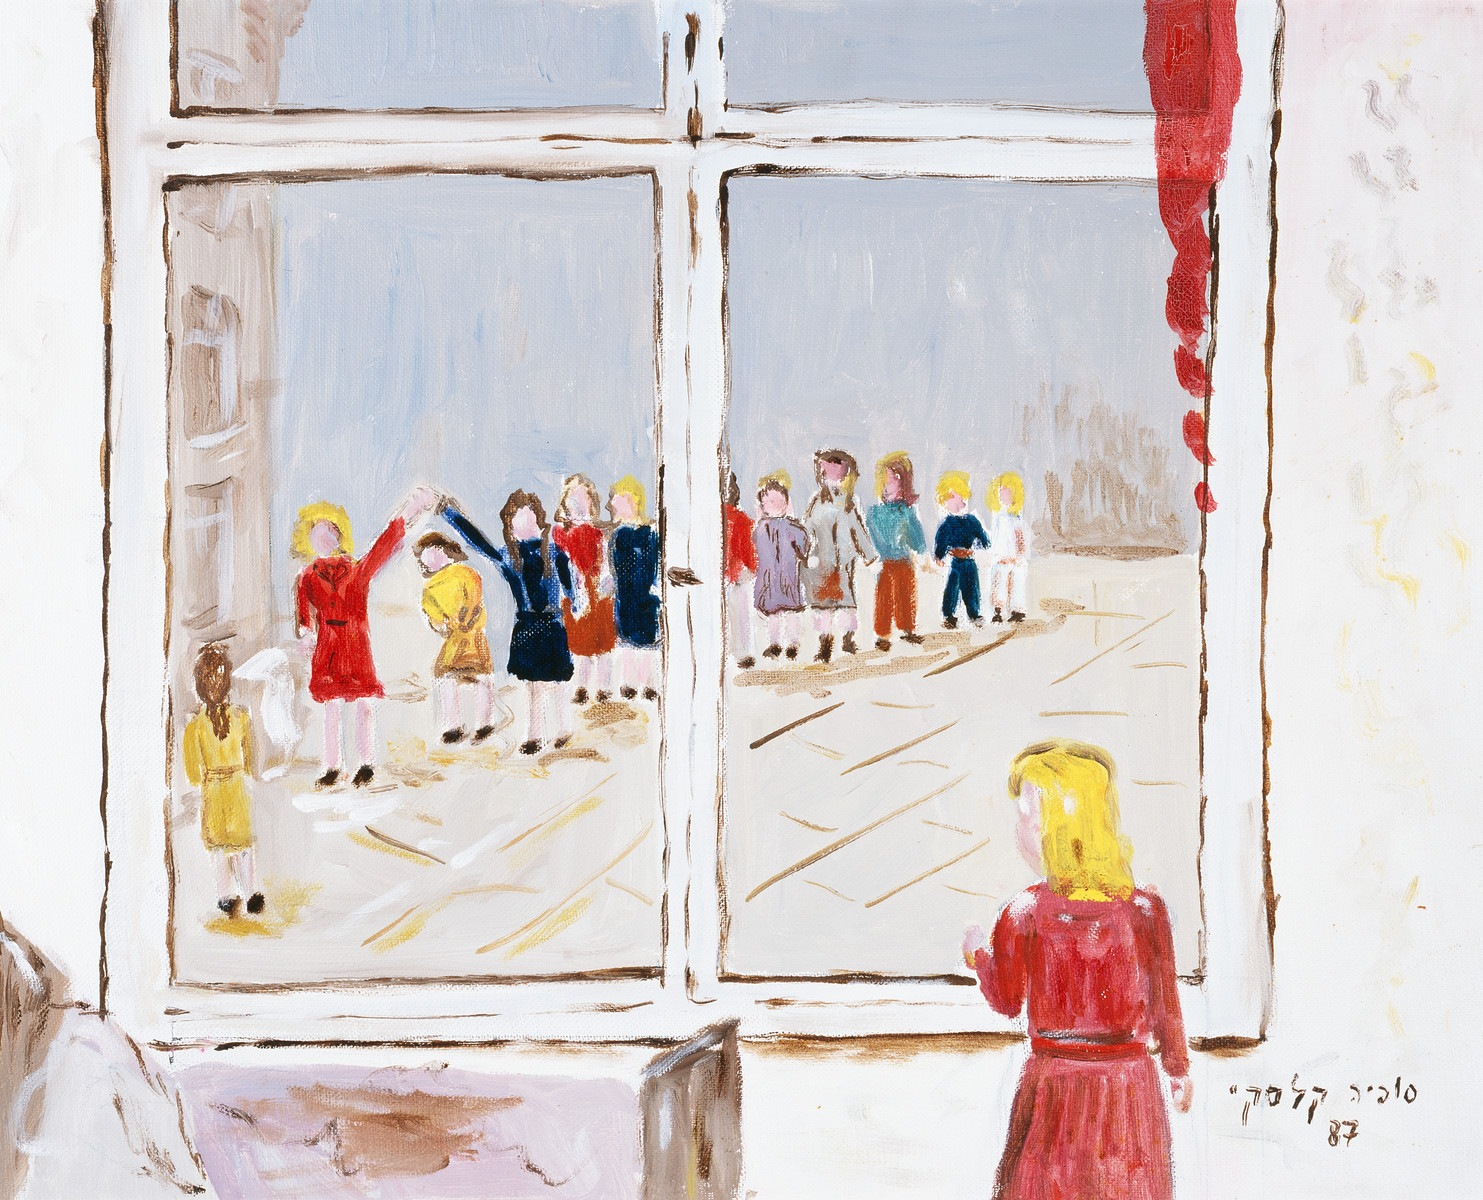 A painting by artist Sophia Kalski depicting children playing in the Lwow ghetto in the fall of 1942.  

The artist writes "Most of the time the children were inside without an opportunity to go out, and only when there was a moment of peace, the children would play in the courtyard under the supervision of their parents. The game that they were playing was always the same--building bridges. The game itself lacked the joy of childhood. Already then, the children didn't know how to laugh."